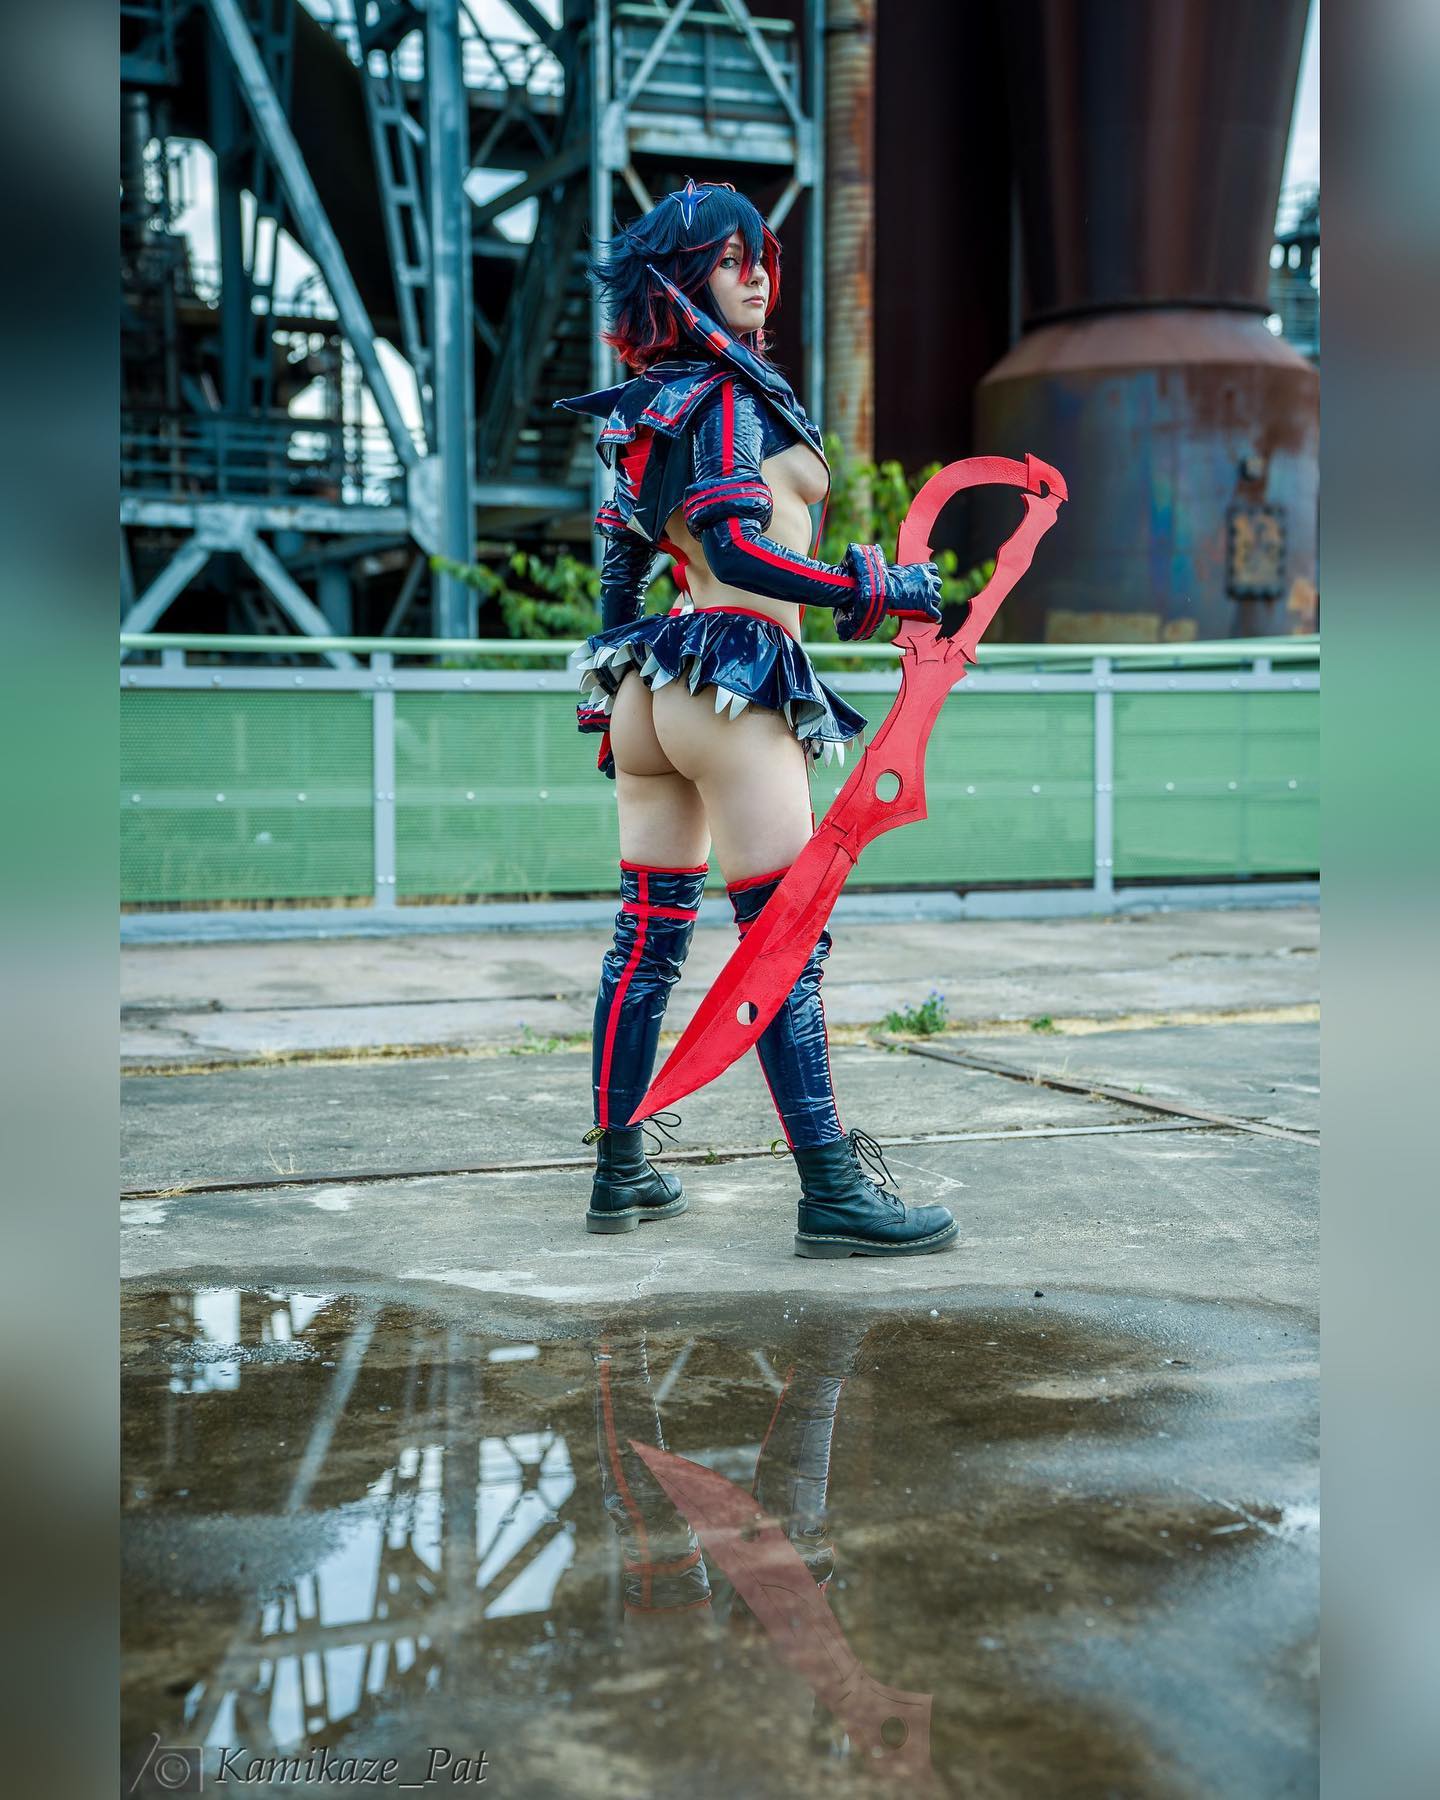 ✂️💙
-
Another ryuko post!!
This was in june in the @landschaftsparkduisburgnord ! It was such a cool experience working with @kamikaze_pat . The pictures he took of me are just awesome 🙏😩❤️
-
pictures & editing by @kamikaze_pat 📸
-
tags!
-
#cosplay #cosplayer #cosplaying #cosplaygirl #ryuko #ryukocosplay #ryuuko #ryuukomatoi #ryukomatoi #ryūkomatoi #matoiryuko #ryukomatoiedit #killlakill #killlakilledit #killlakillcosplay #killlakillryuko #ryukokilllakill #landschaftsparkduisburg #anime #animecosplay #manga #viral